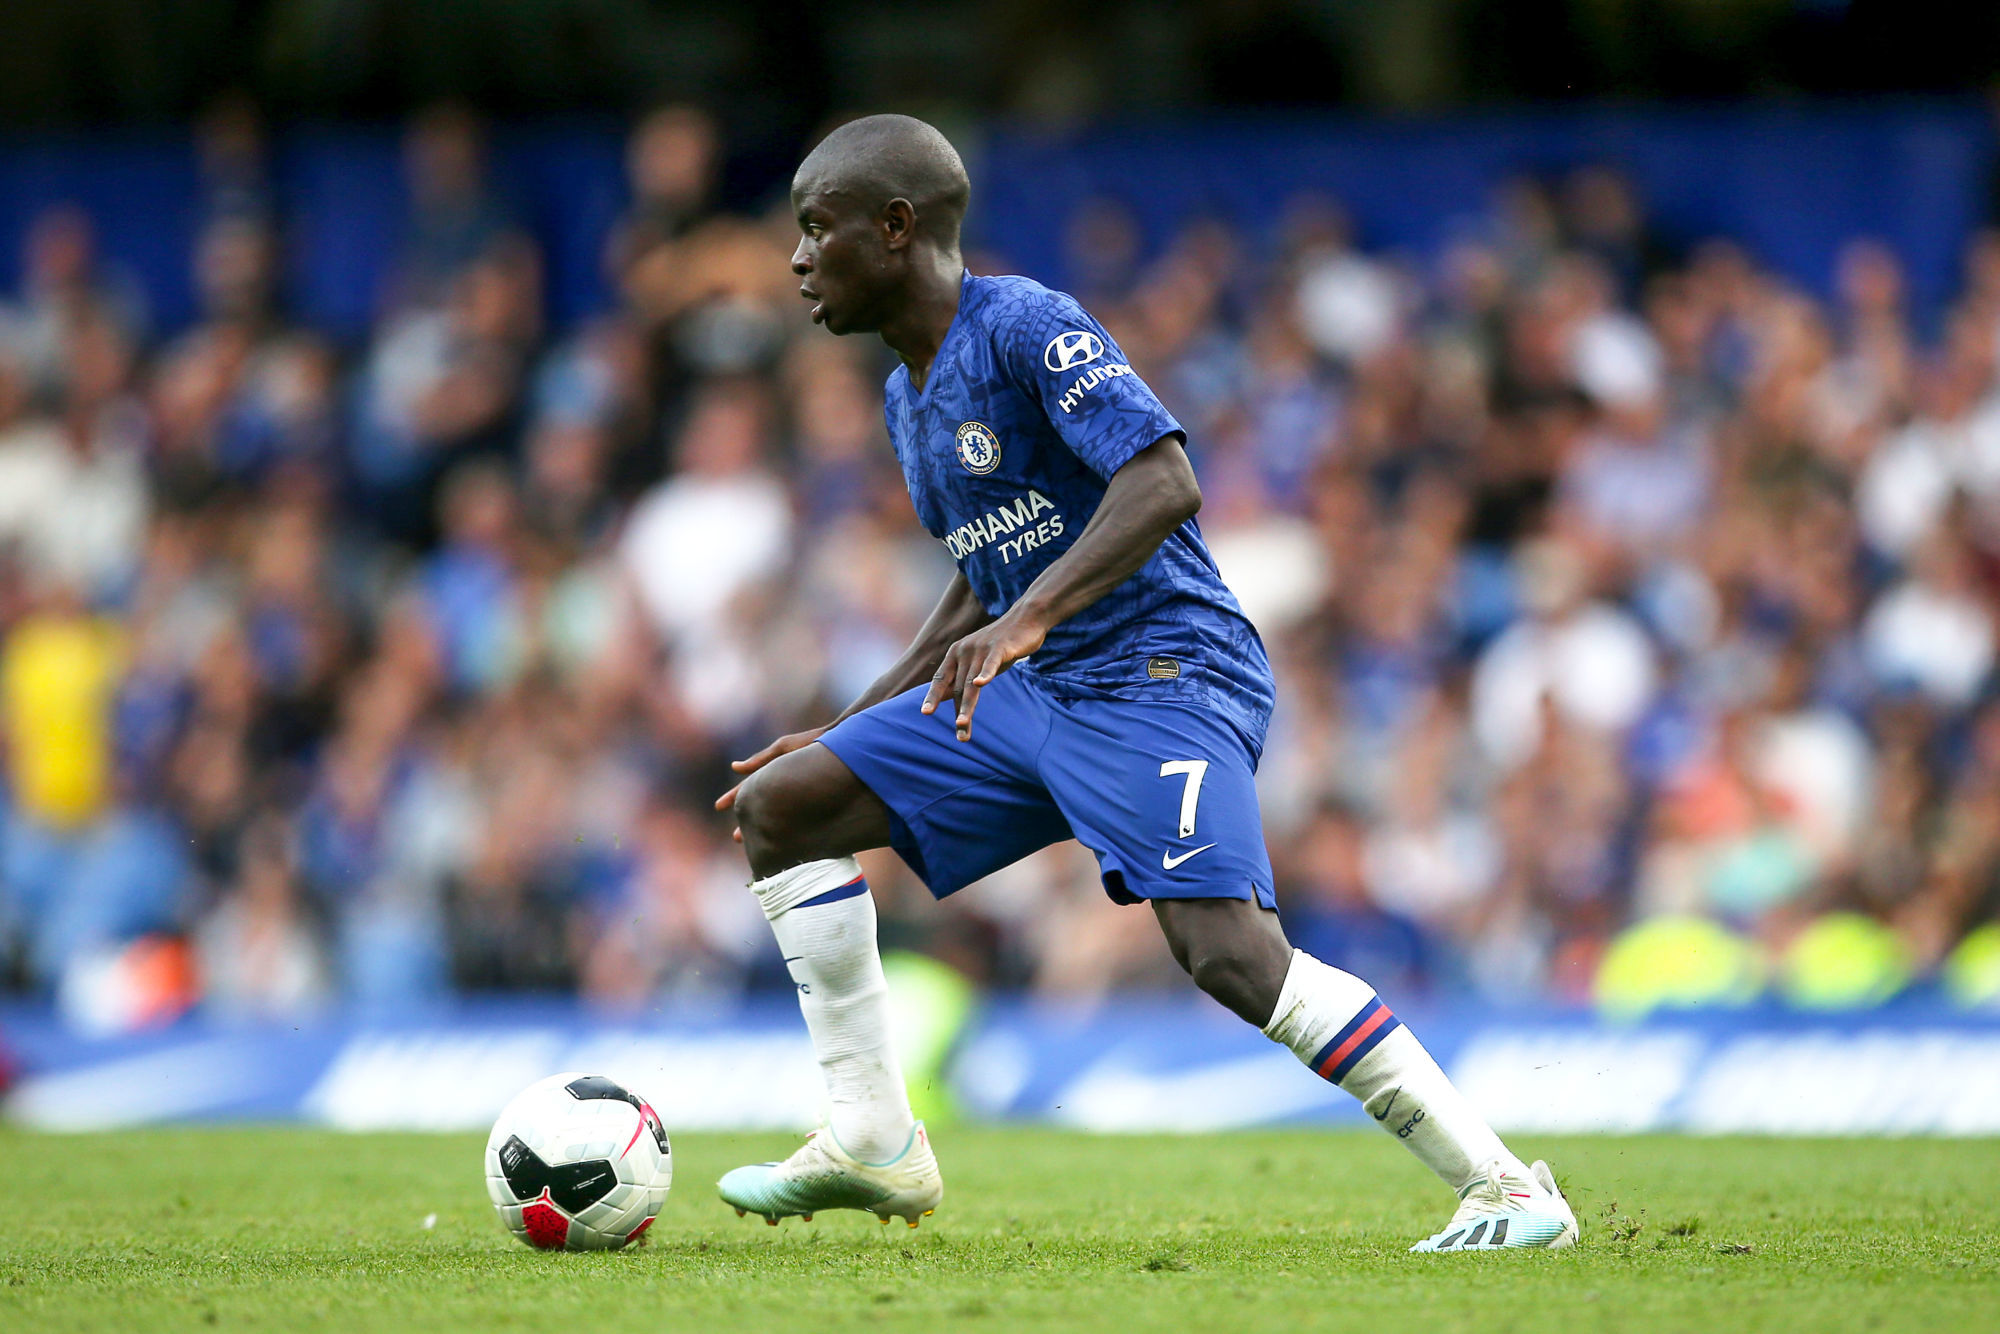 Chelsea's N'Golo Kante during the Premier League match at Stamford Bridge, London. On August 18th, 2019.
Photo : PA Images / Icon Sport